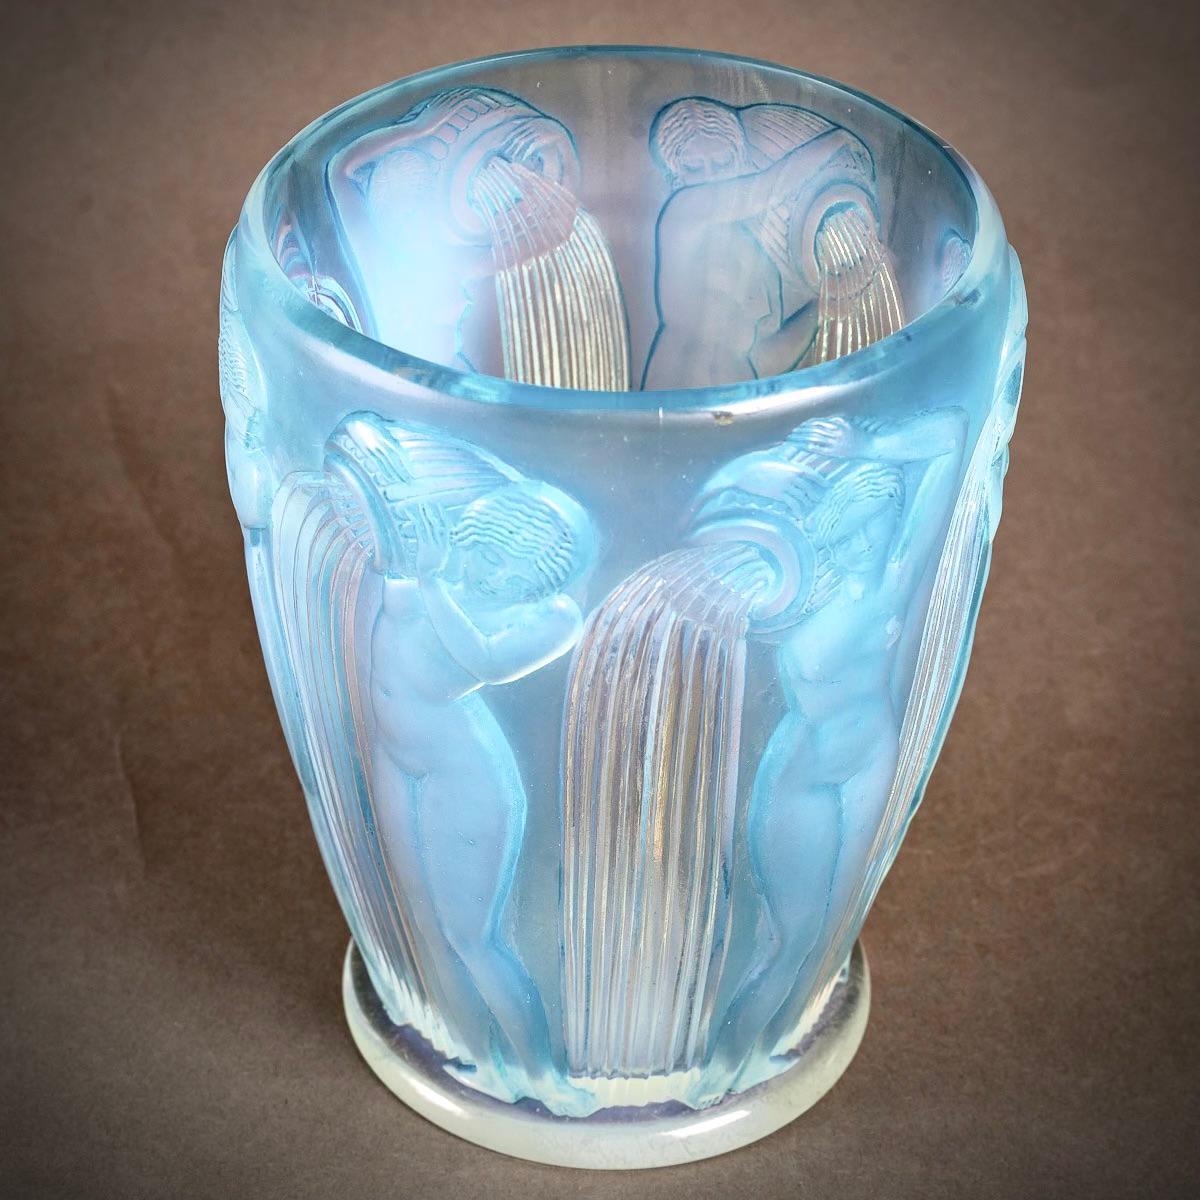 French 1926 Rene Lalique Danaïdes Vase in Opalescent Glass Blue Patina, Pouring Women